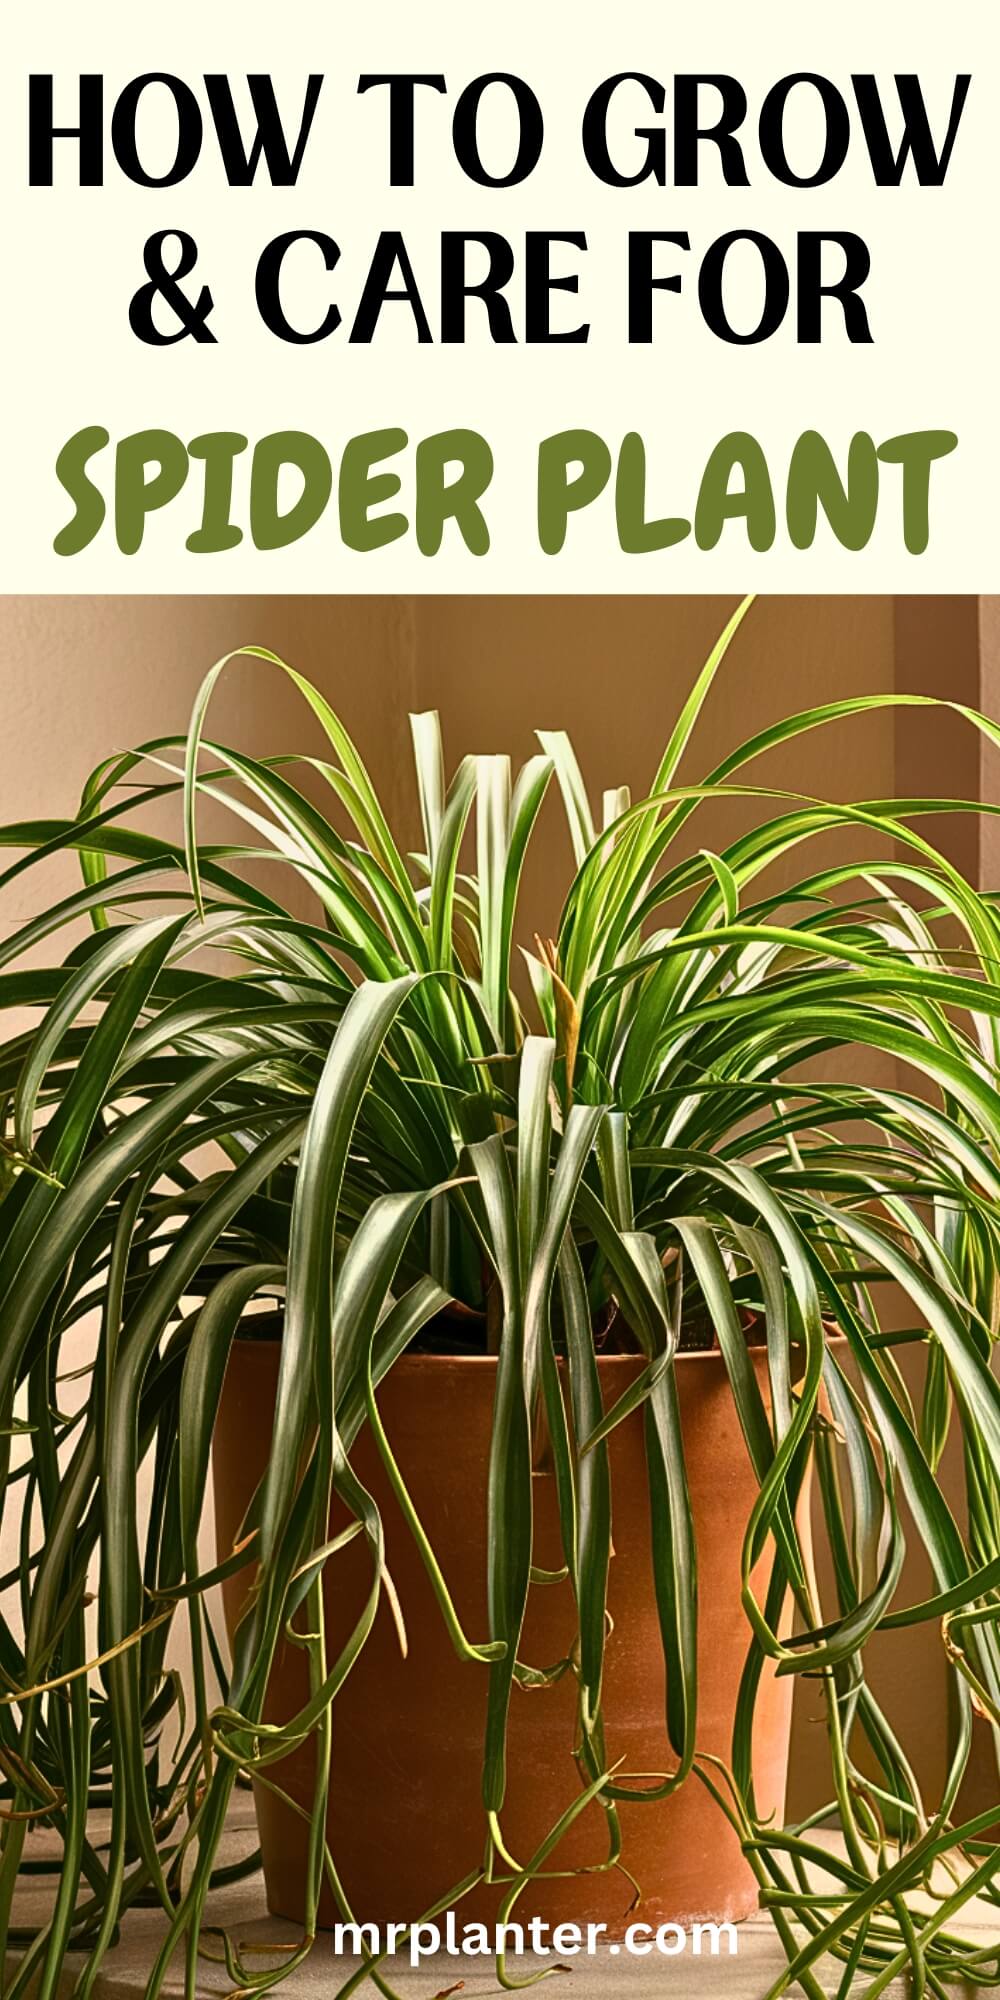 How to Grow and Care for Spider Plant?